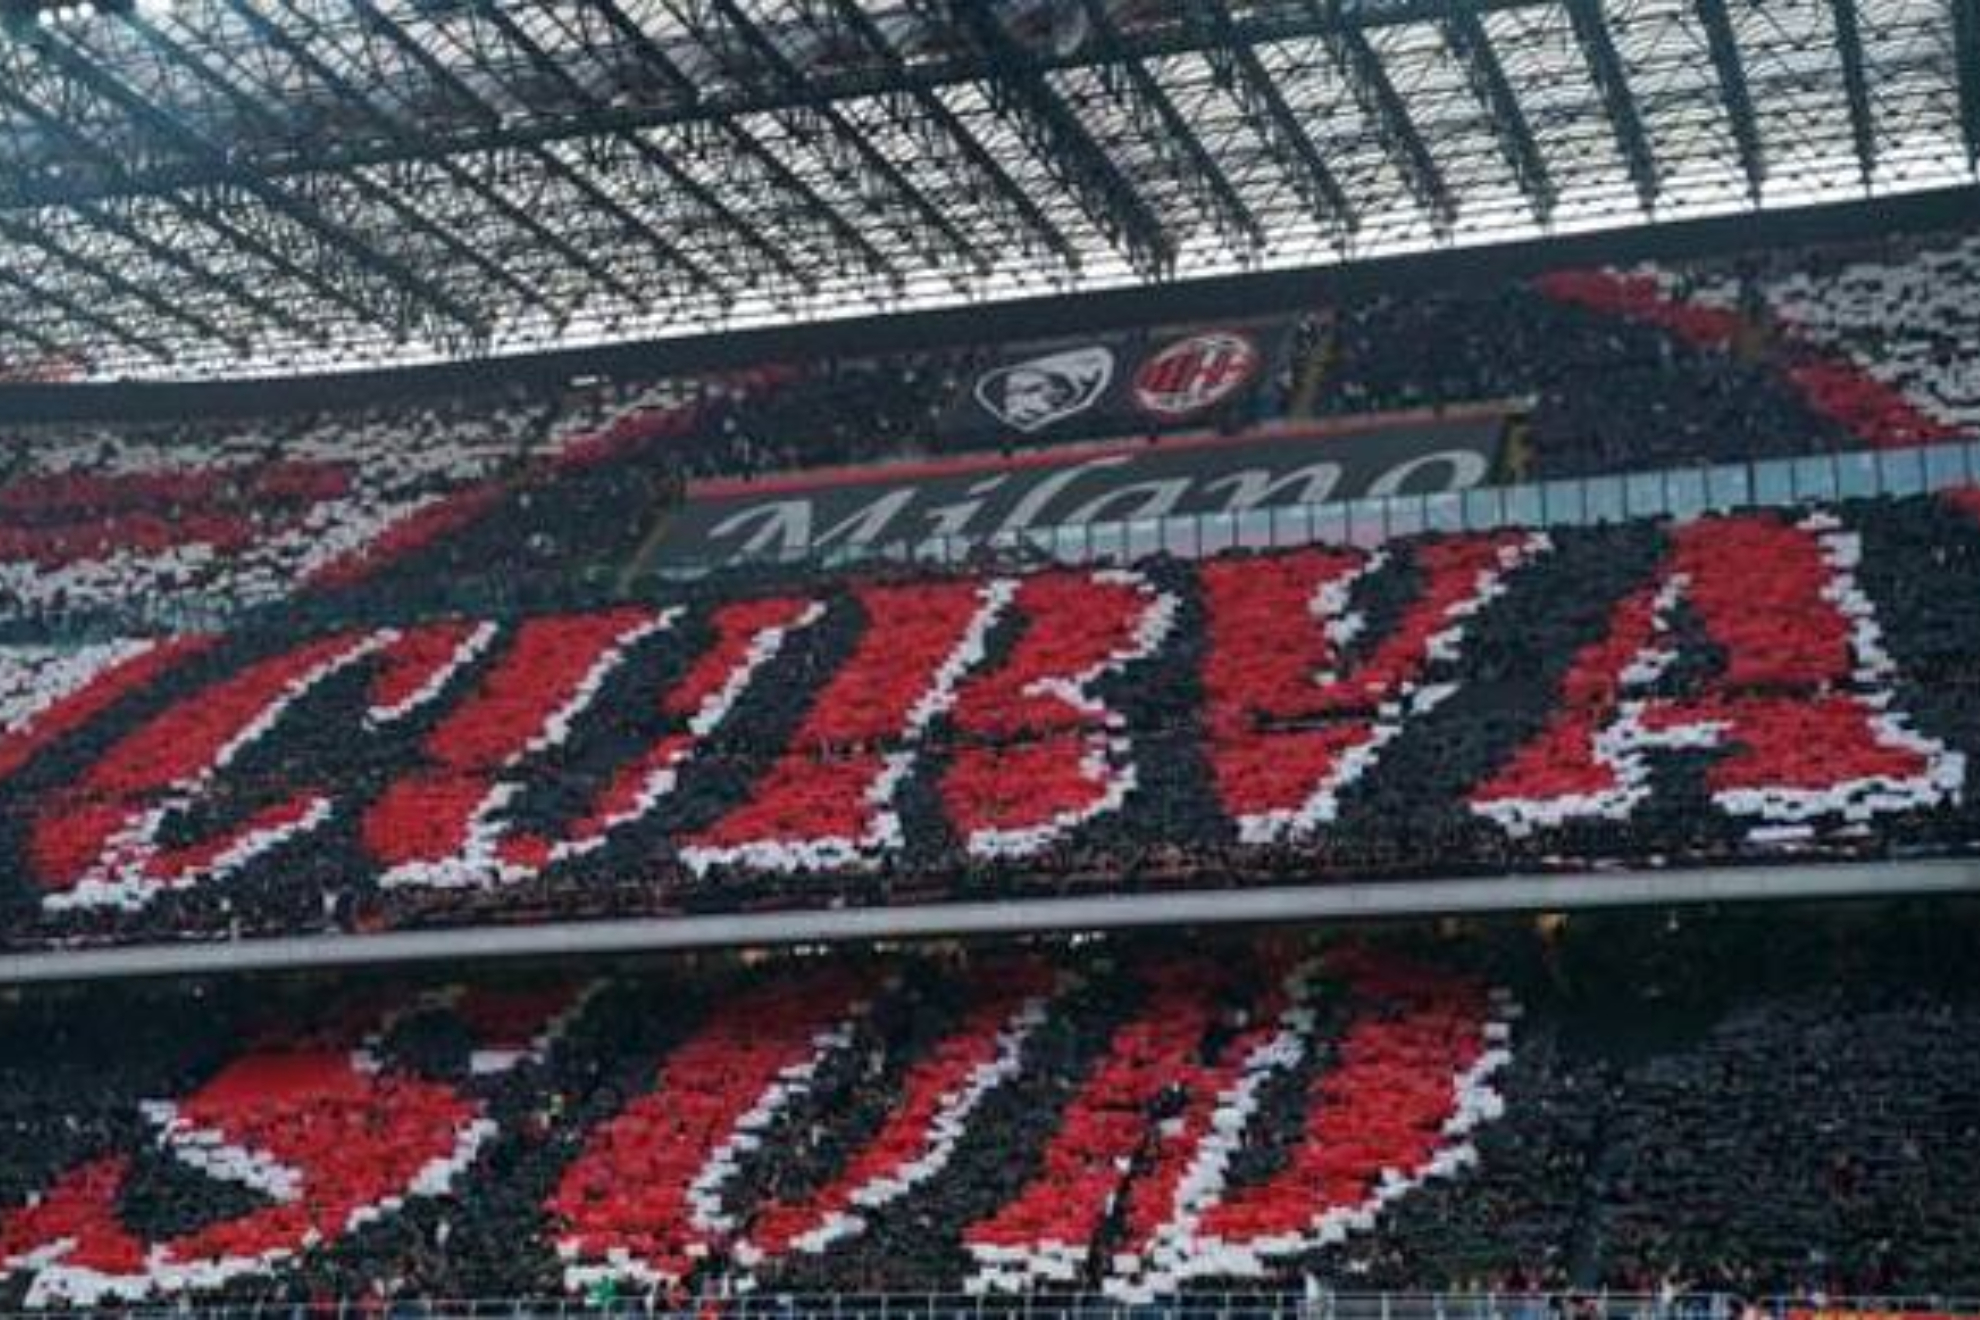 AC Milan fans to choose design of scarves for the match against Lazio